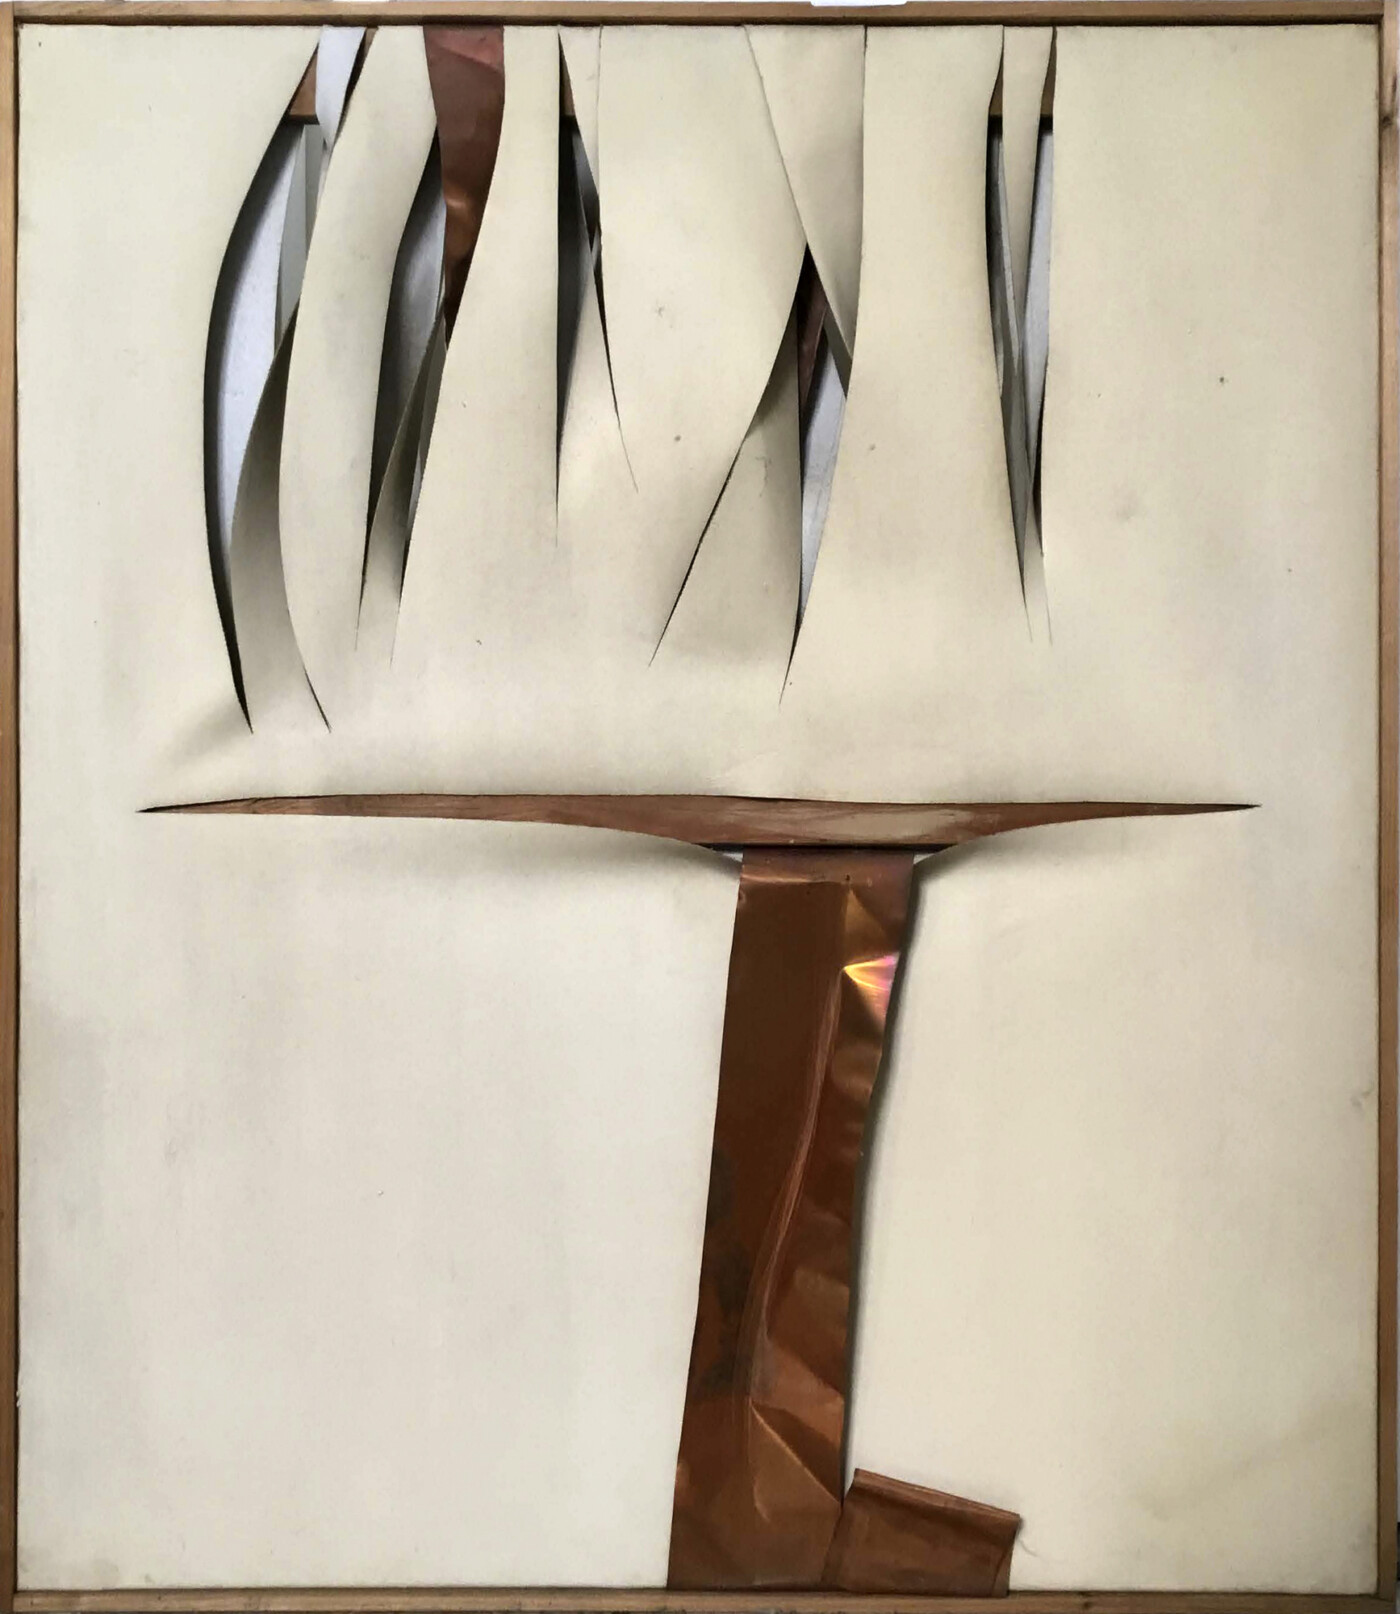 A square-formatted canvas has several vertical cut-lines on its upper register, revealing the empty space of the wall through the resulting jagged slits. At the bottom register, an L-shaped piece of copper metal reflects light.